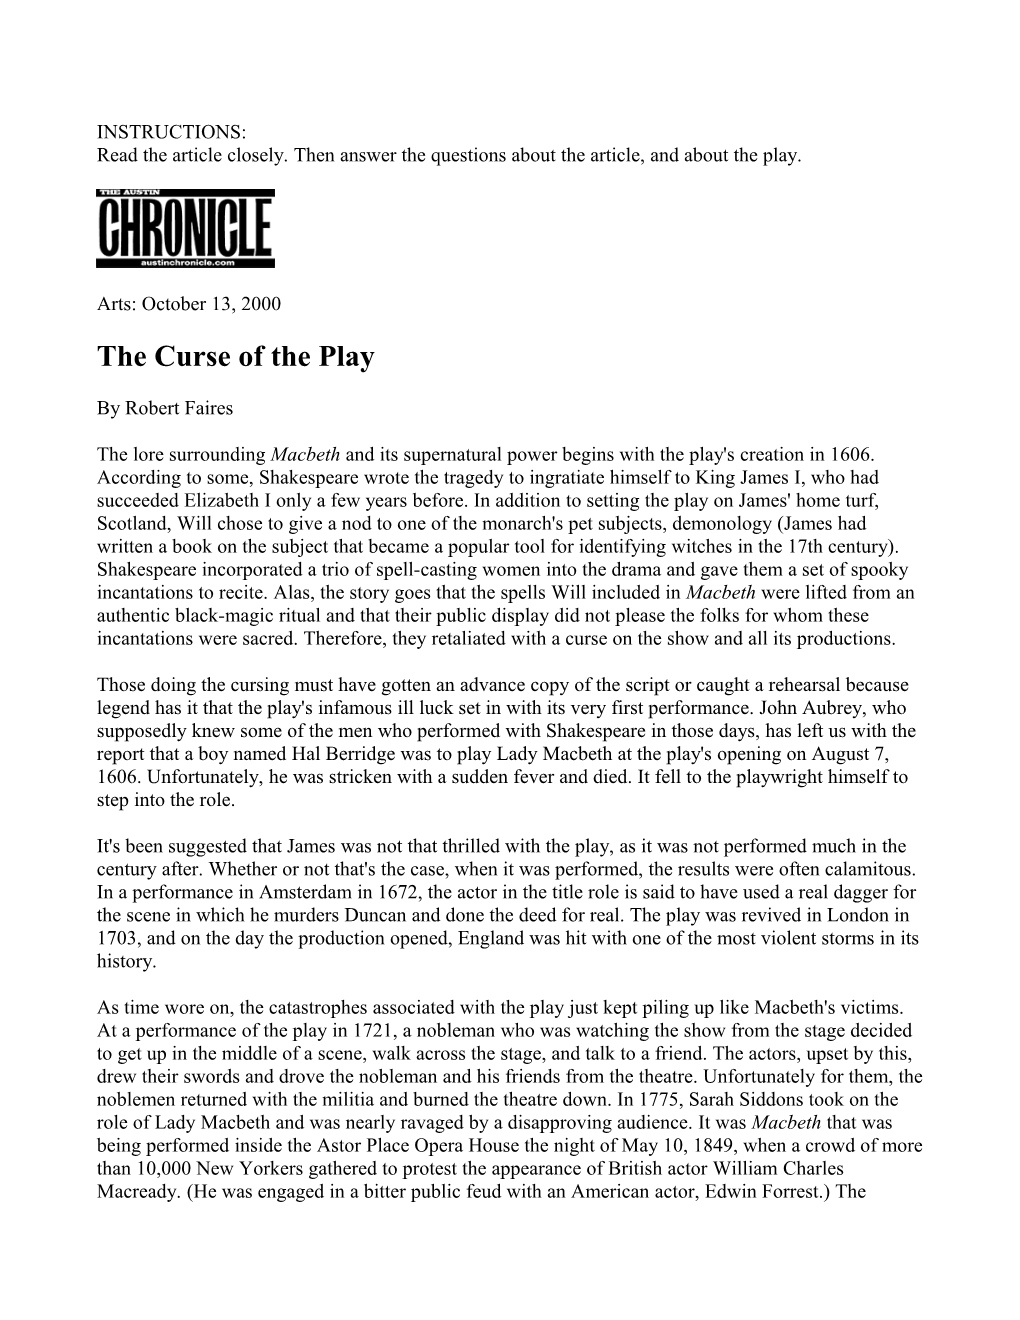 The Curse of the Play